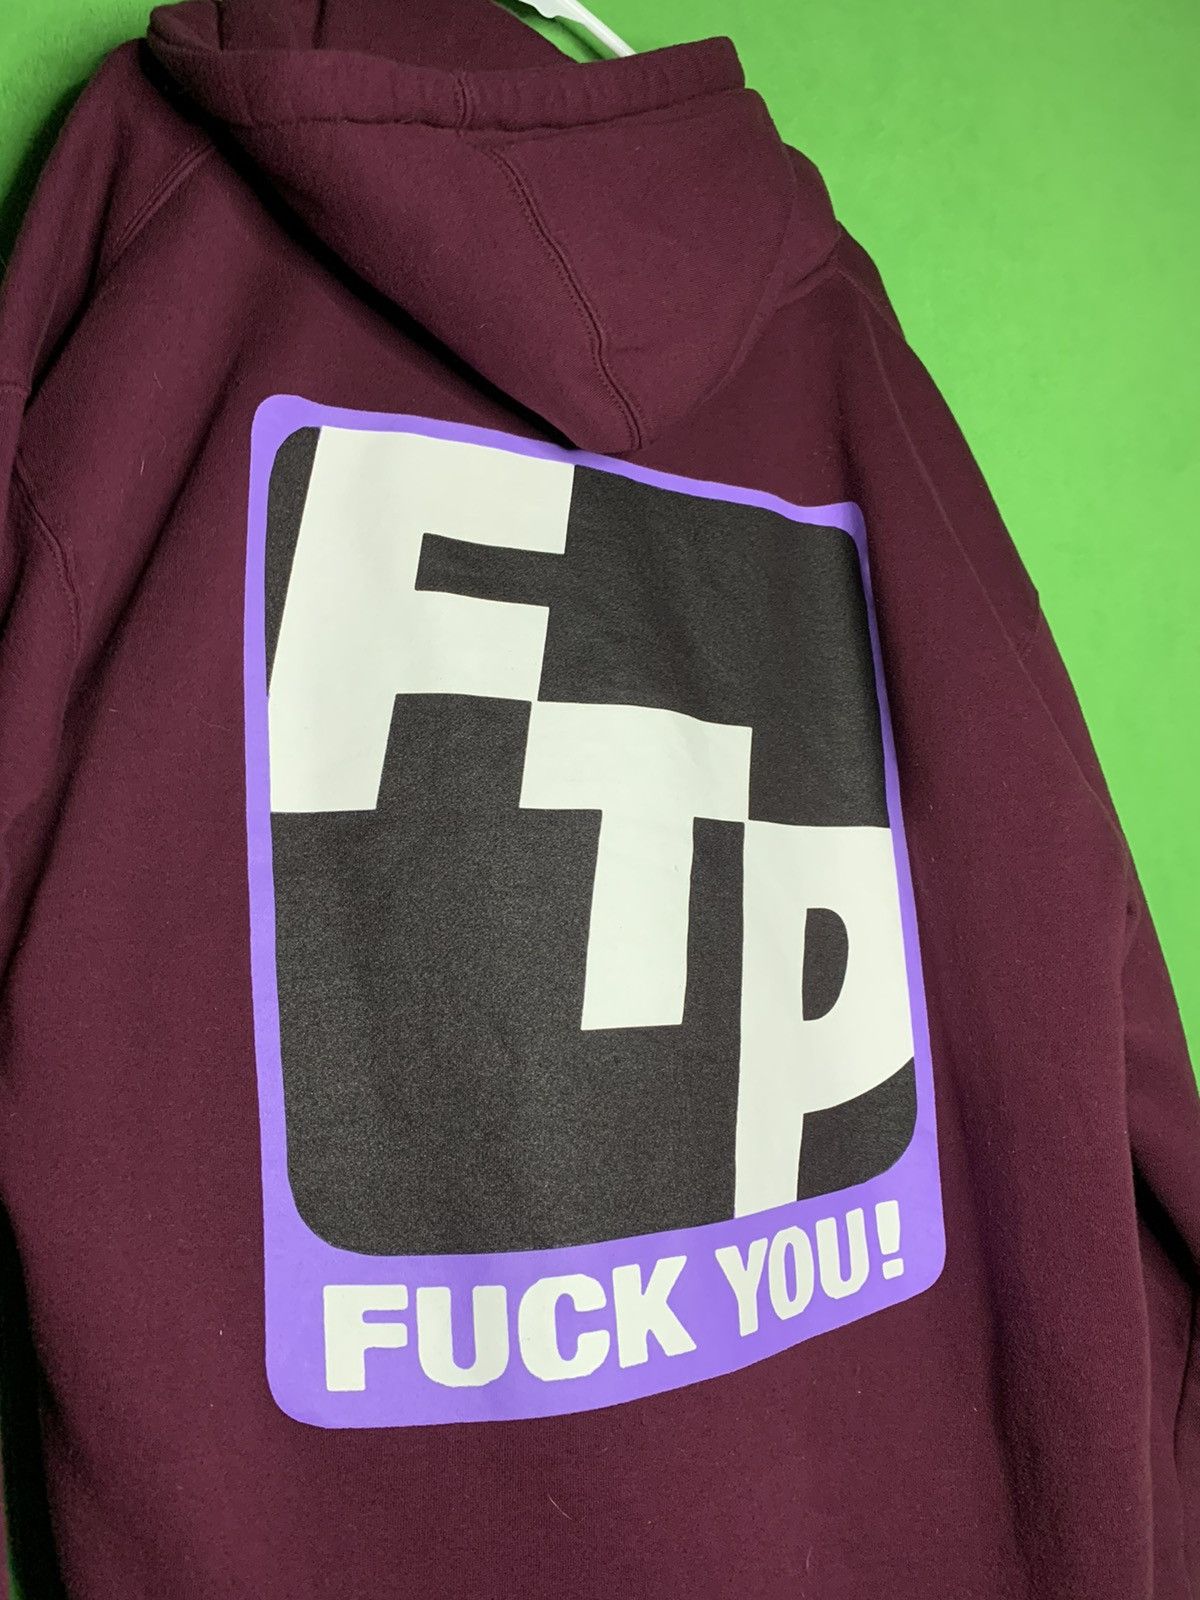 Fuck The Population FTP FUCK YOU Hoodie XL Size US XL / EU 56 / 4 - 1 Preview